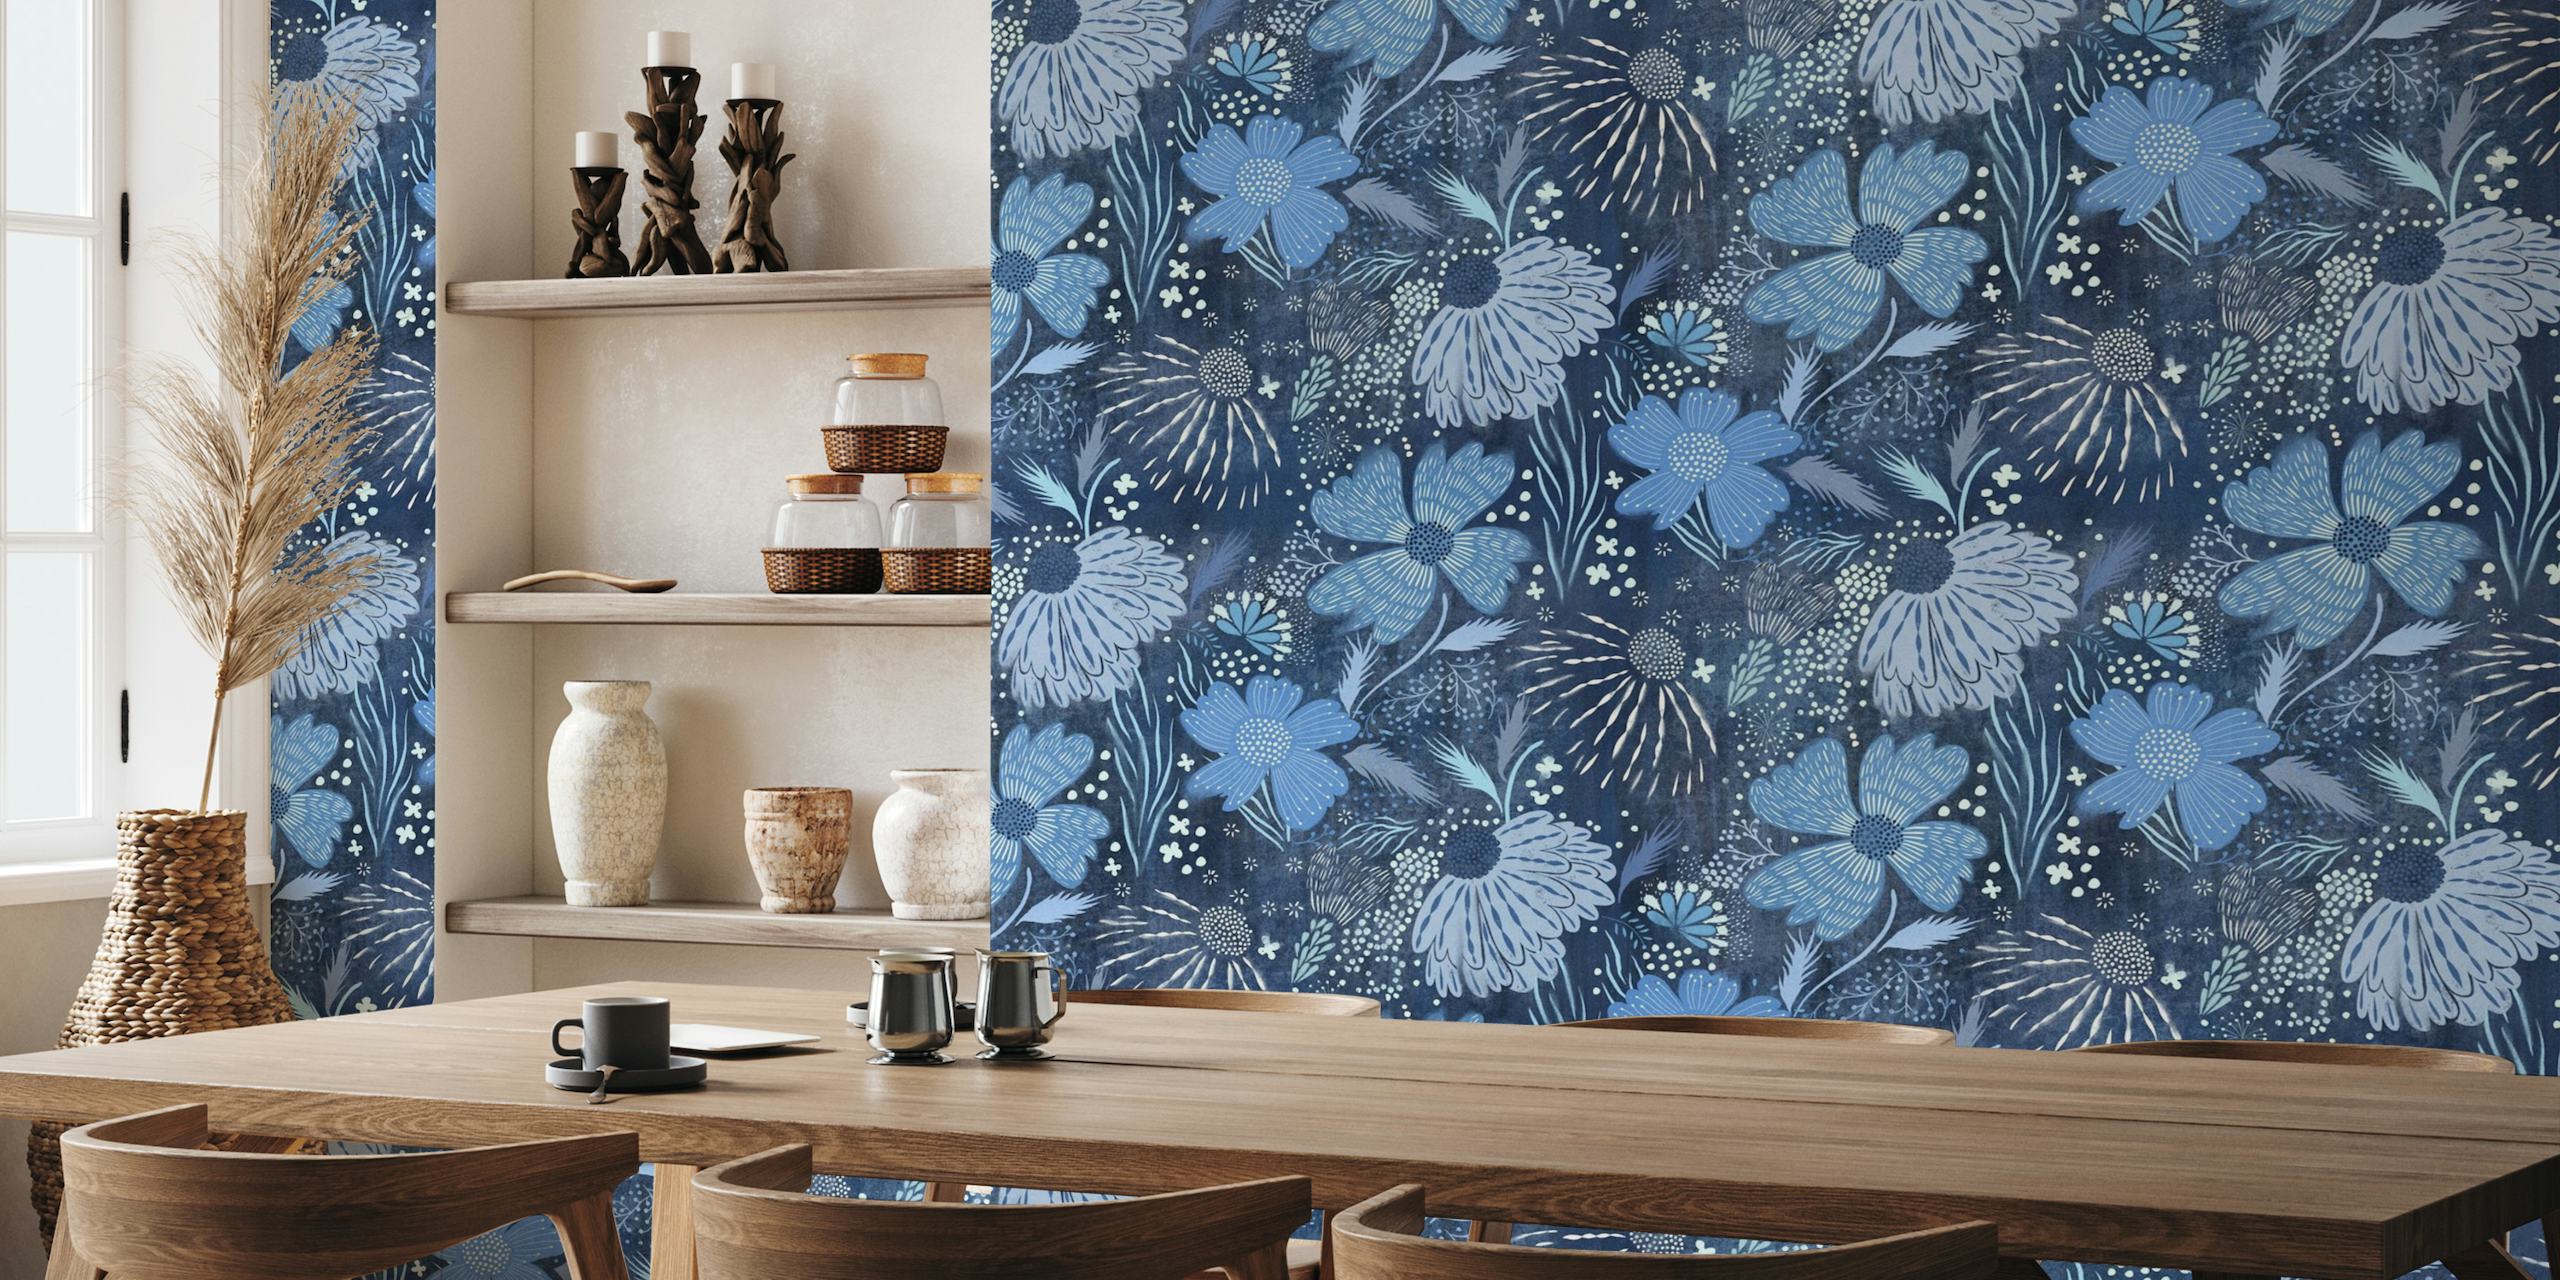 Shibori blue florals wall mural with Japanese inspired indigo and white floral patterns